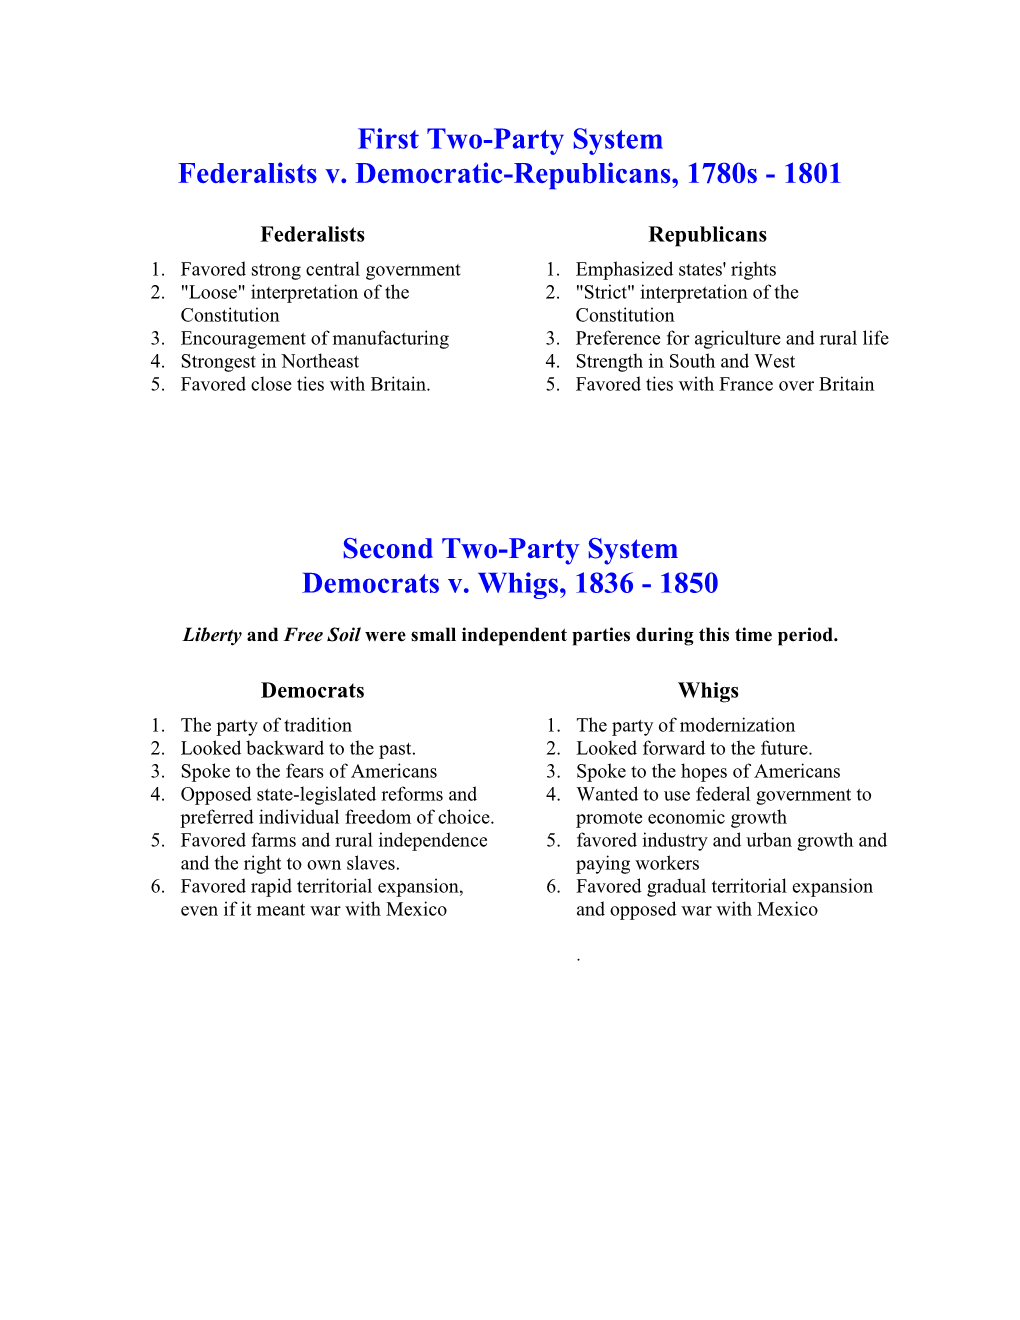 First Two-Party System Federalists V. Democratic-Republicans, 1780S - 1801